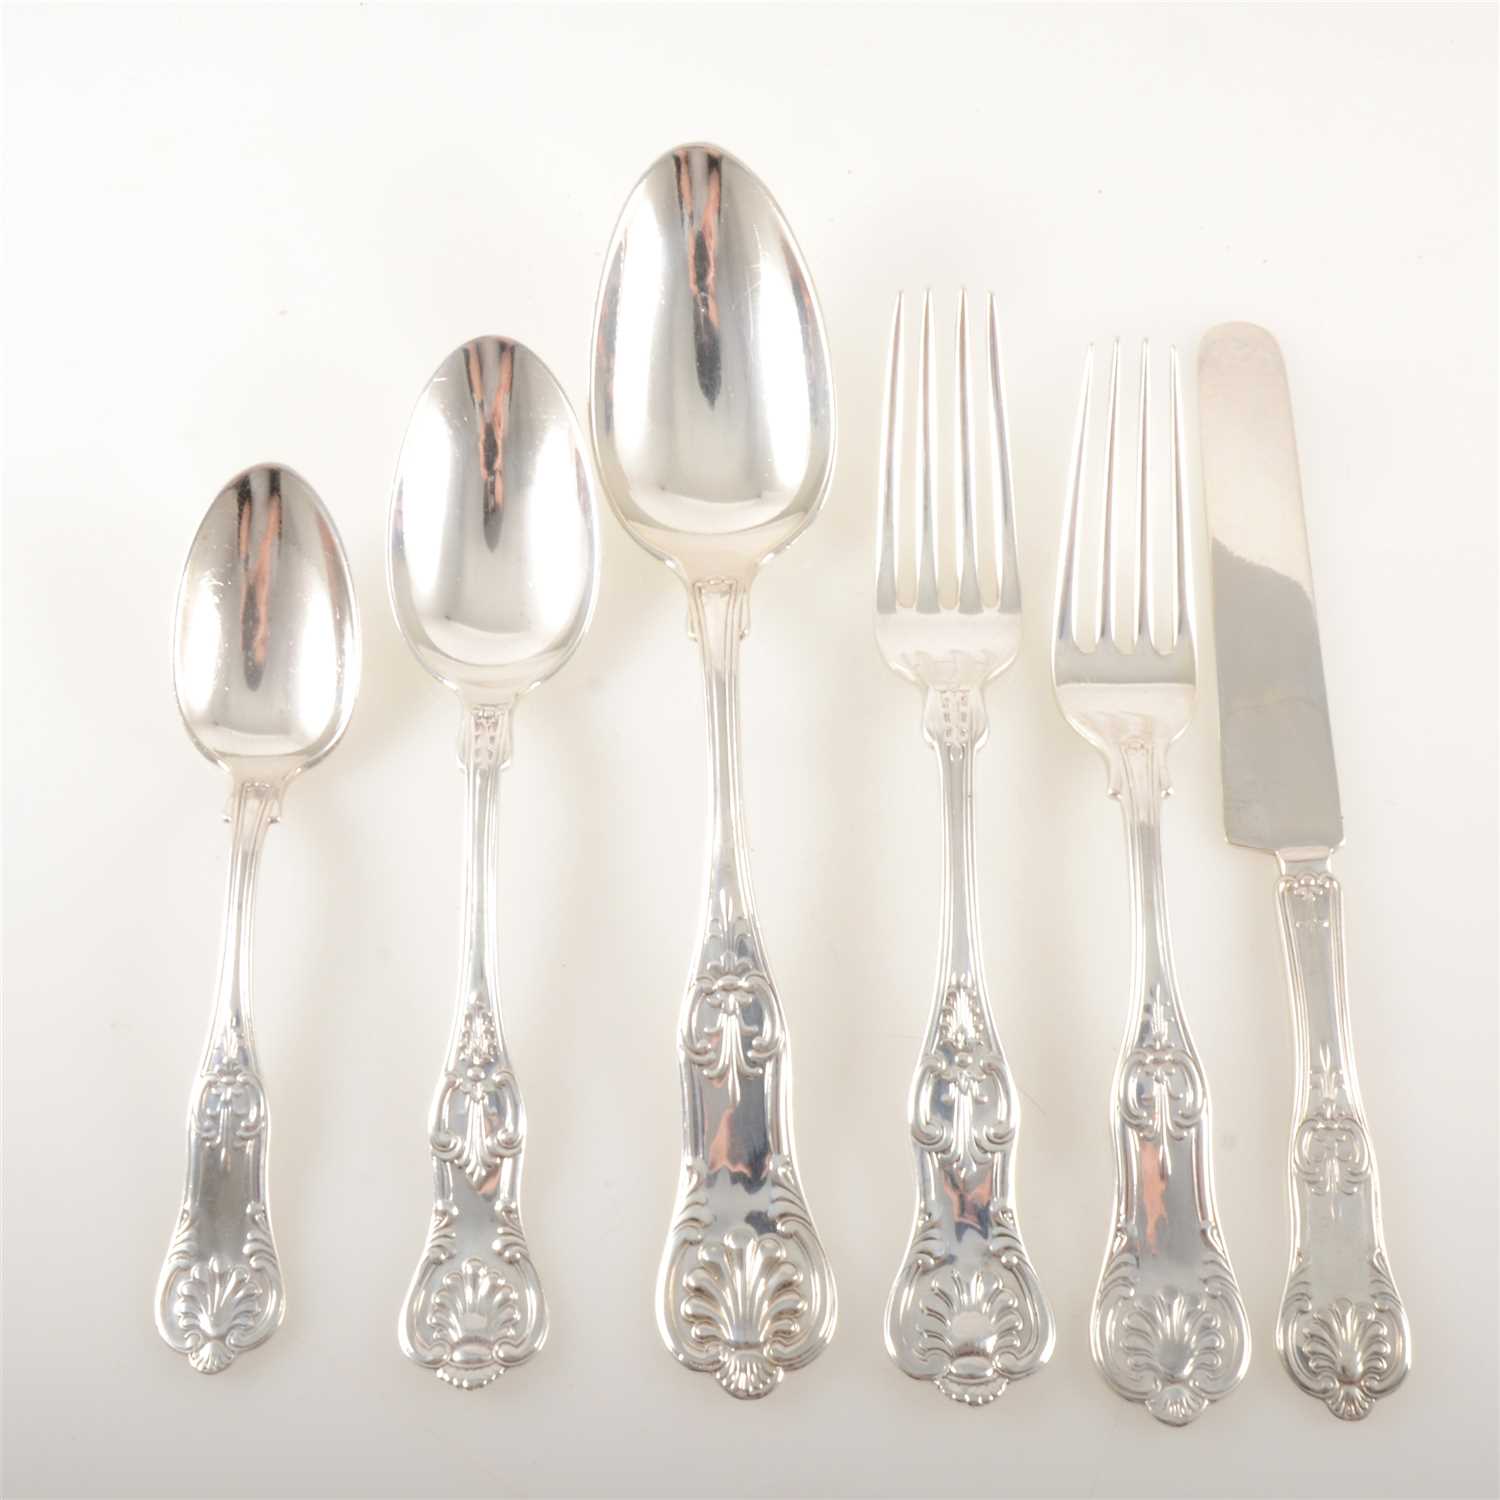 Lot 103 - Canteen of American Sterling silver cutlery, Howard & Co, New York, circa 1900